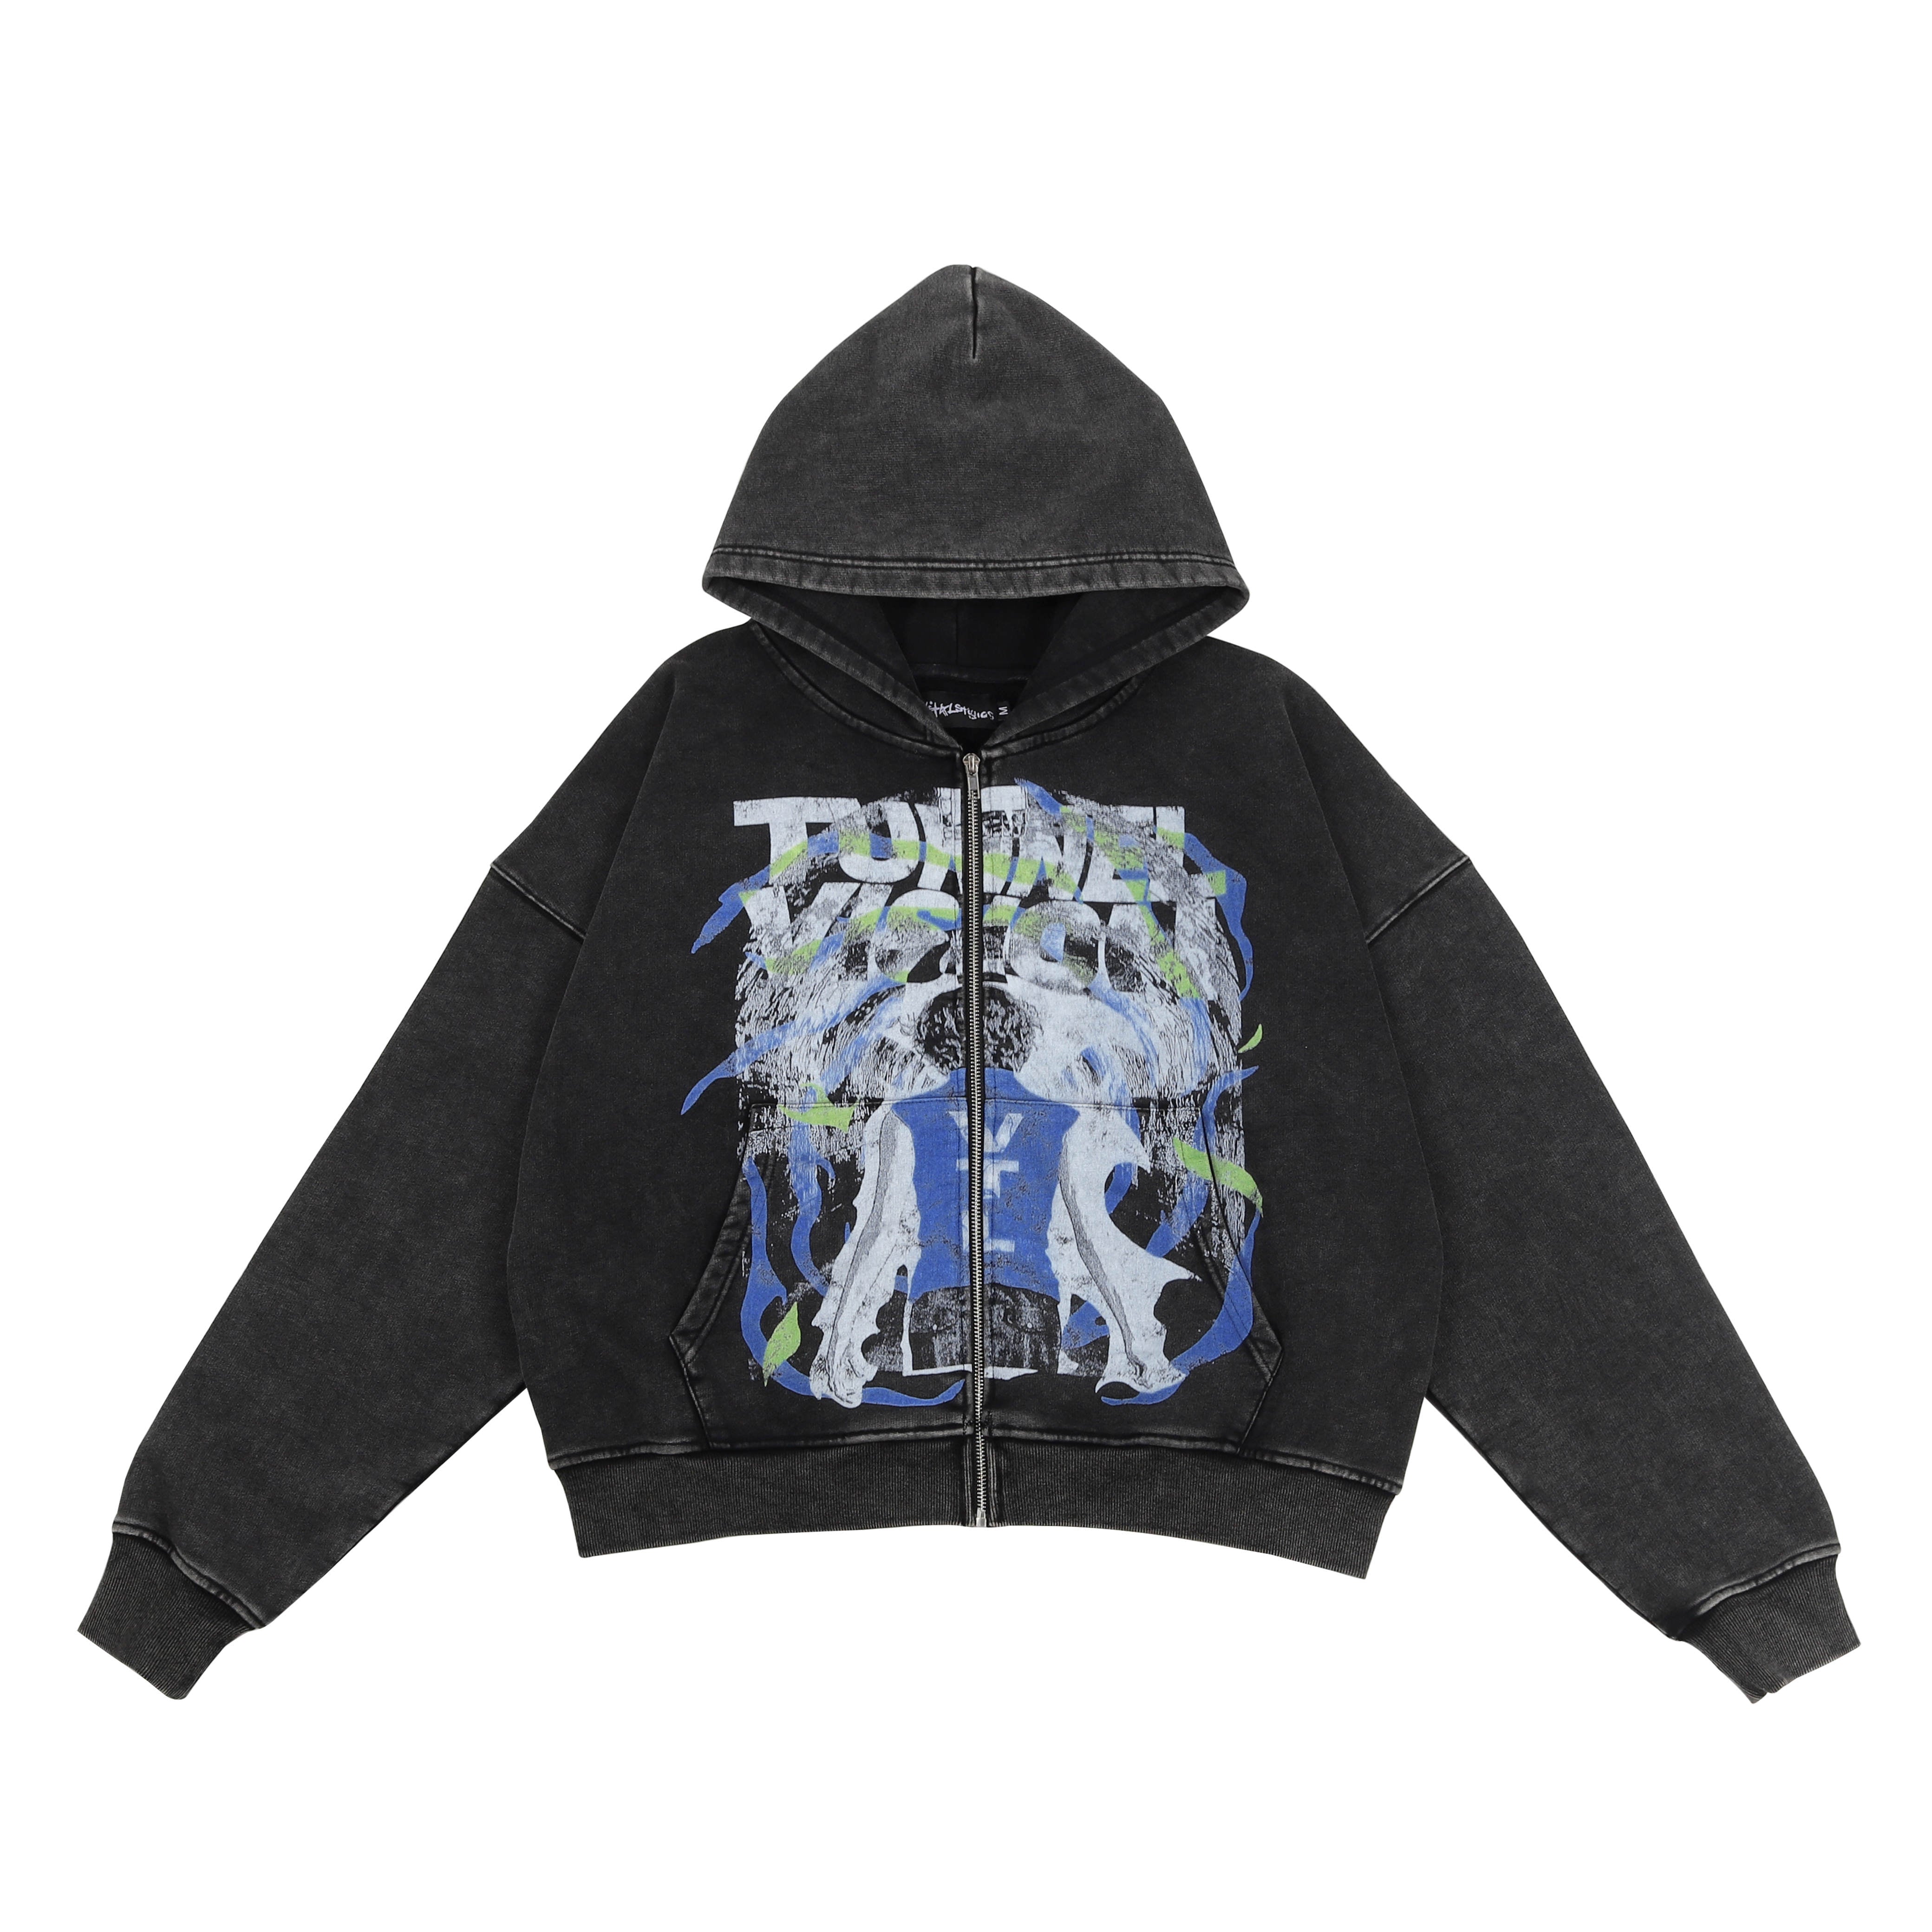 Tunnel Vision Zip Up